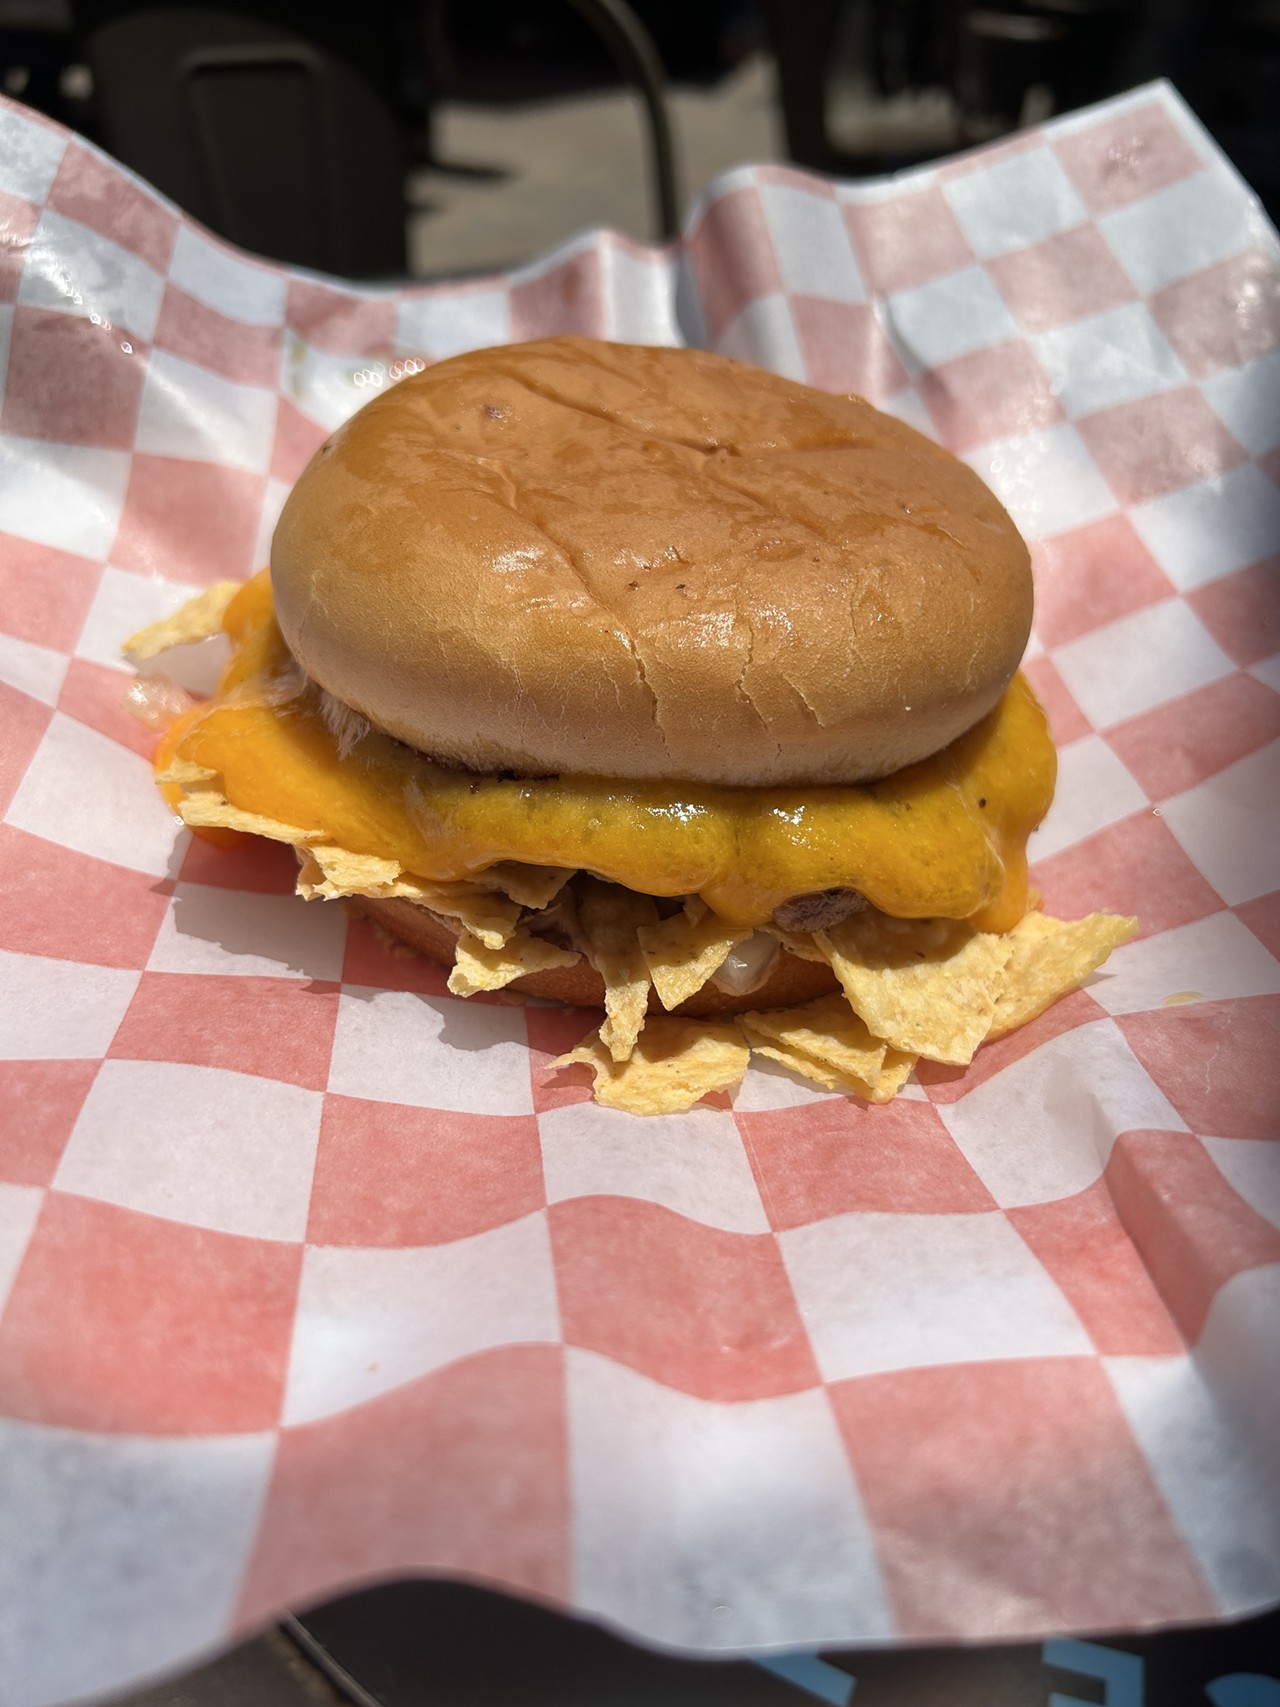 Chris Madrids
1900 Blanco Rd
$5 The Toastada Burger
Mama Madrid’s homemade refried beans, chips, onions and melted cheddar cheese on a beef patty. make sure to top it off with our signature salsa.